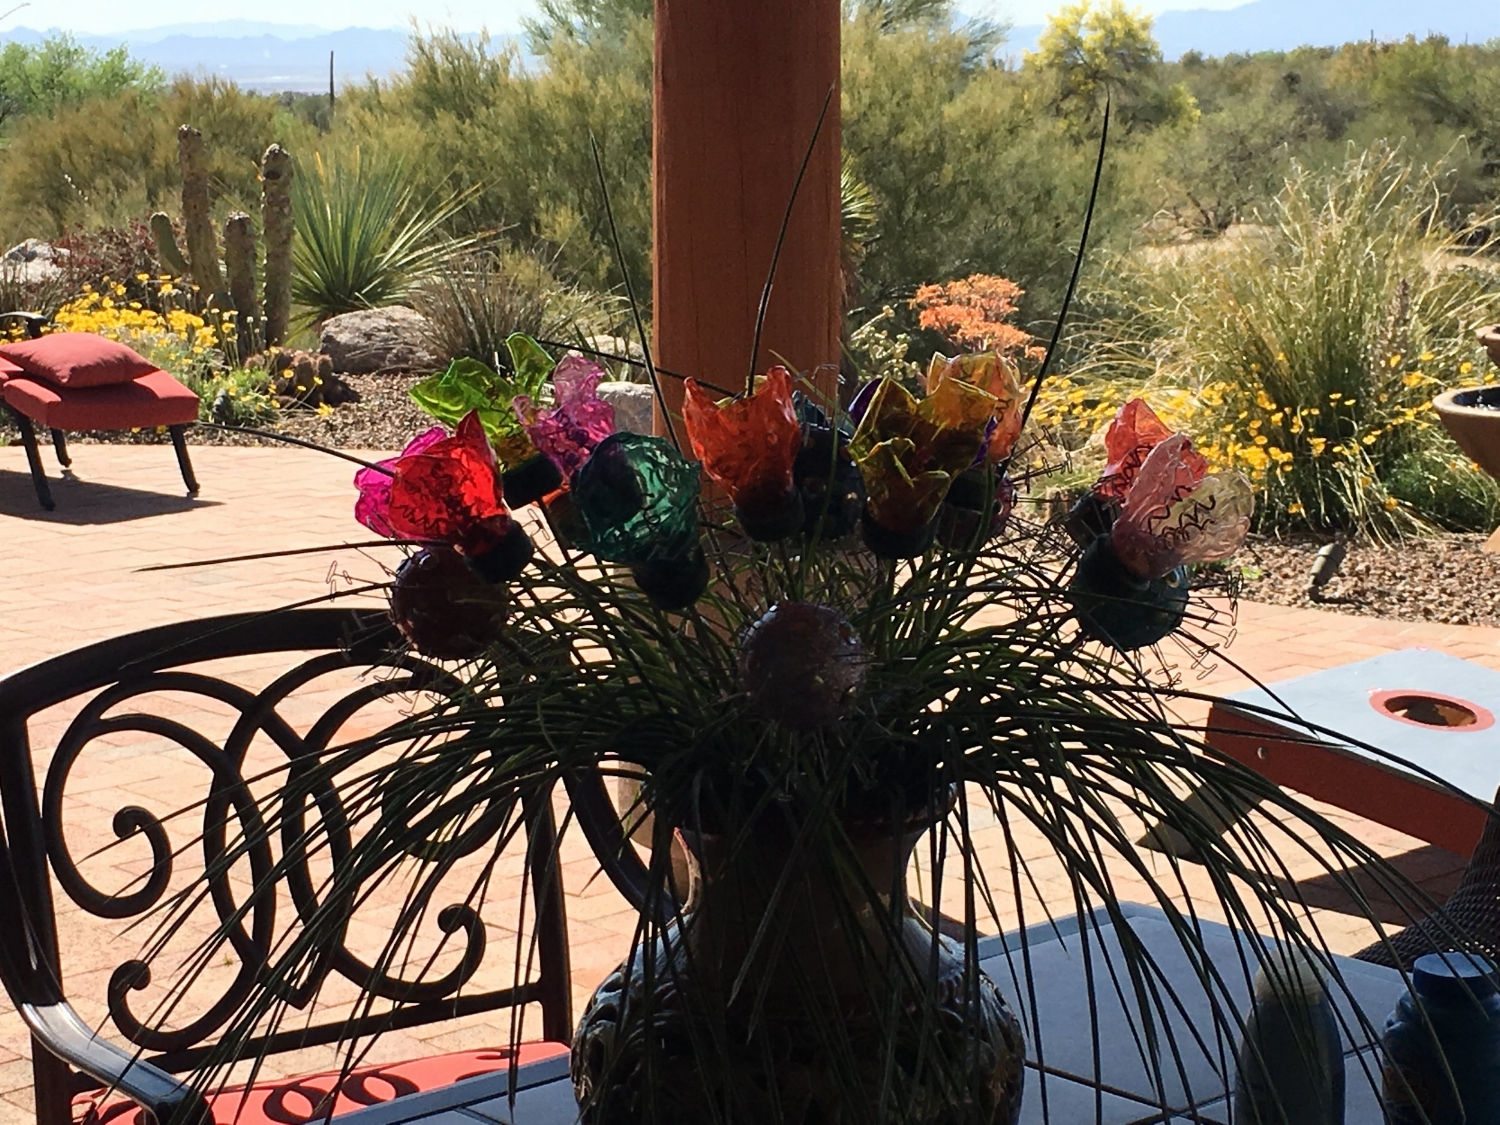 stunning upcycled water bottle flowers adorn a Tucson patio!